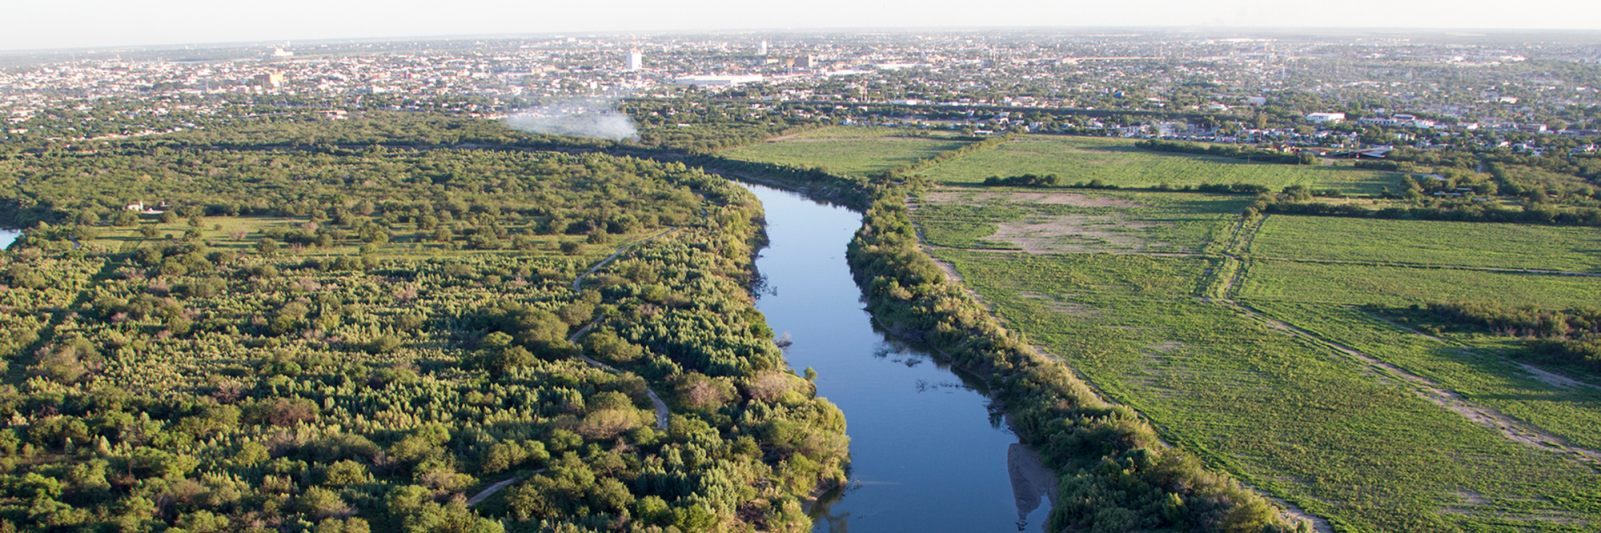 Rio Grande River cutting through forested land and farmland with city on the horizon